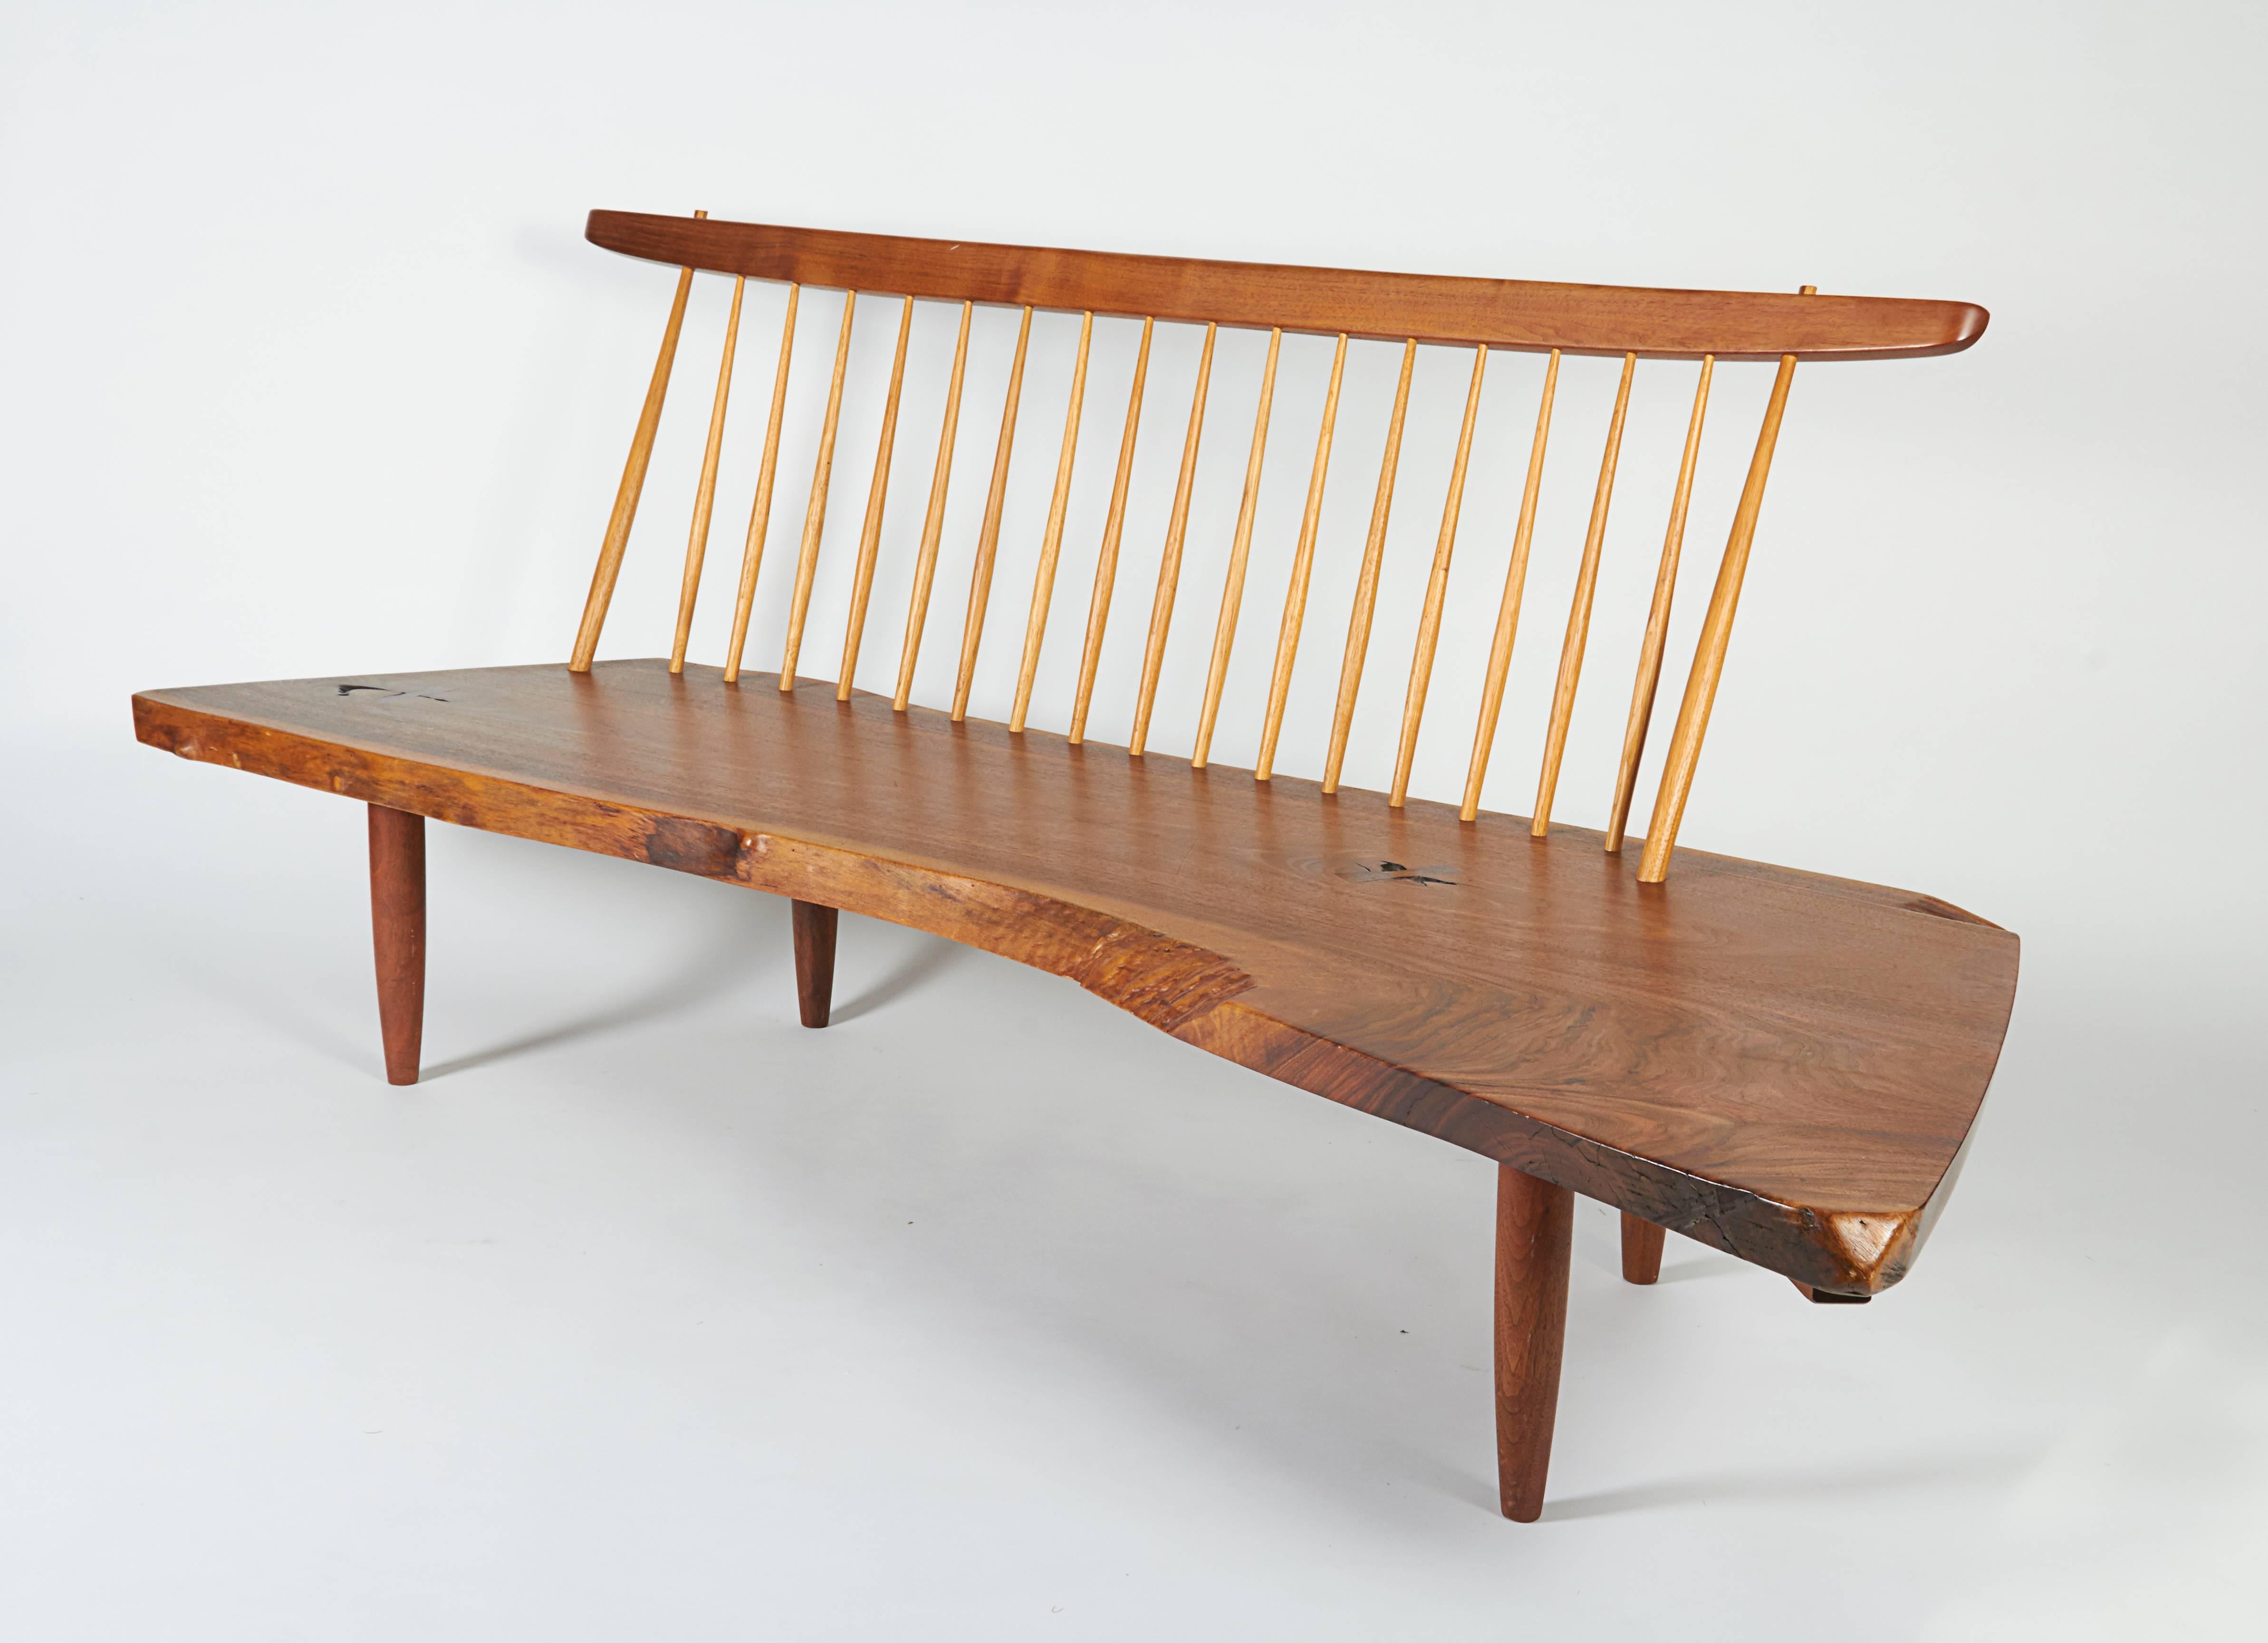 A superior example of this classic Nakashima form with two rosewood butterflies and unusually irregular and beautiful grain characteristics.